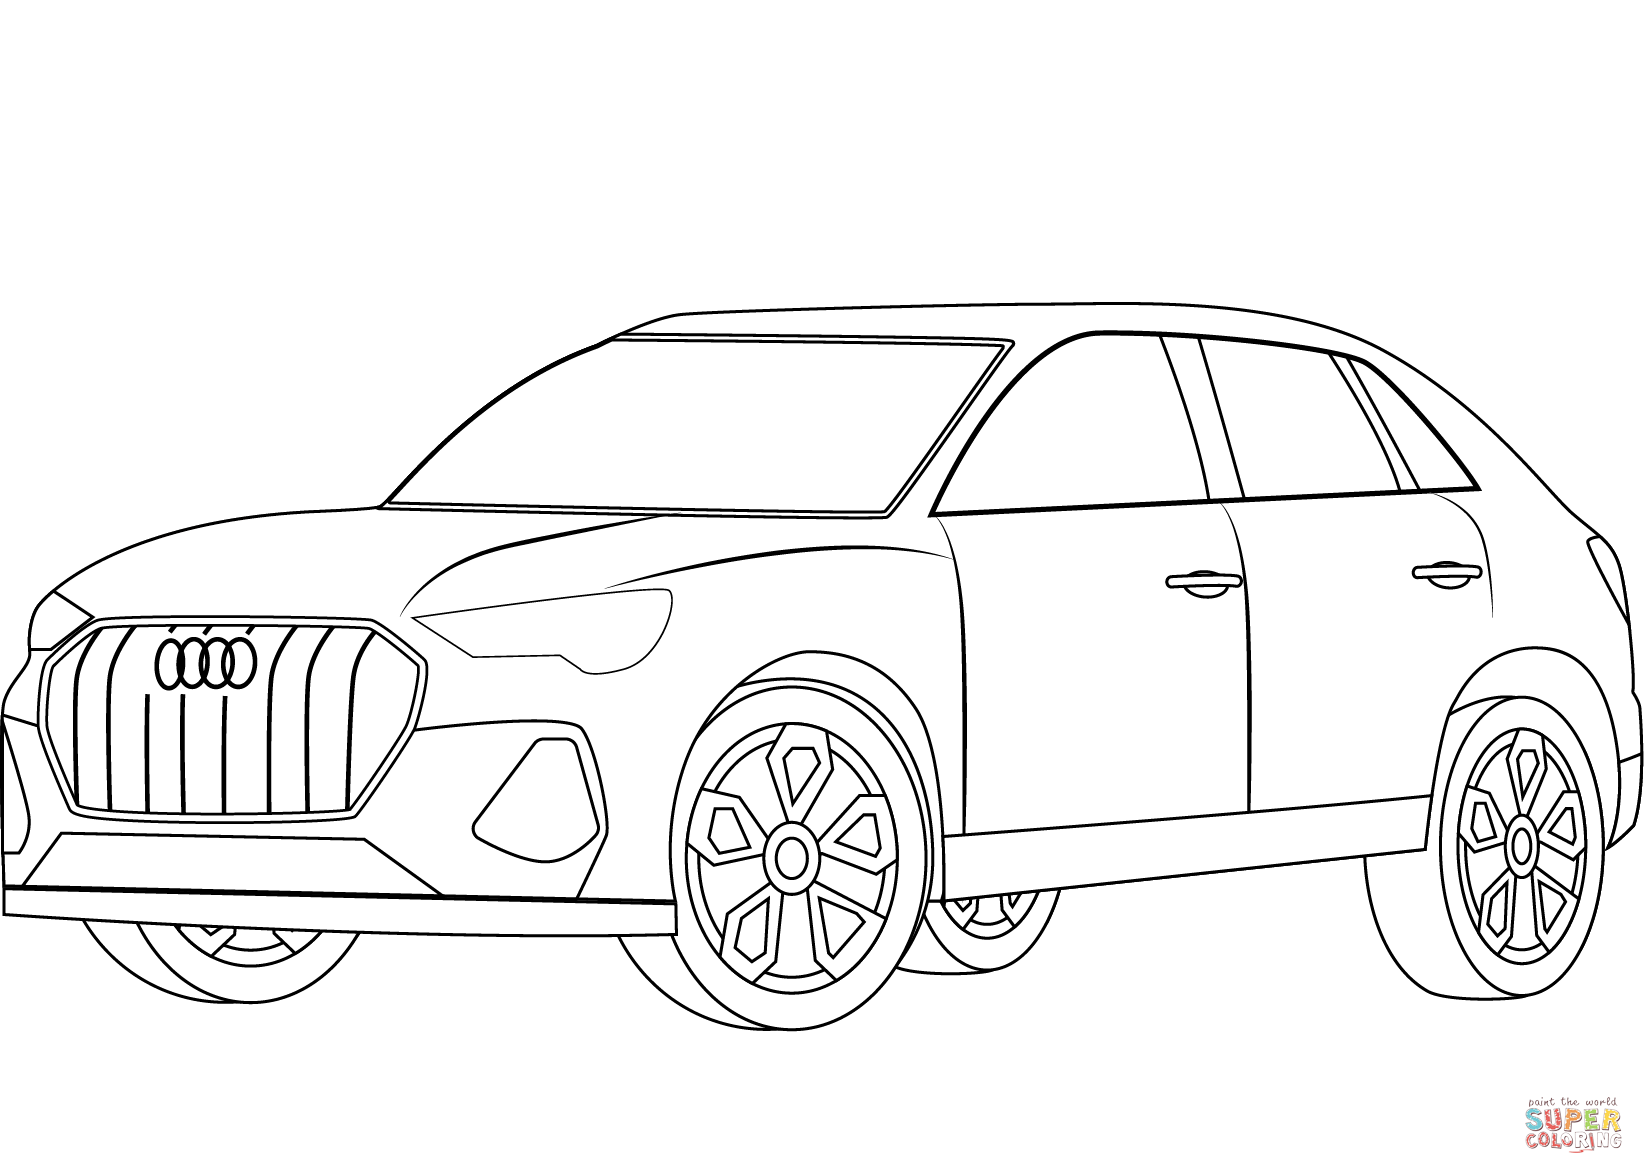 Audi Q3 coloring page | Free Printable Coloring Pages